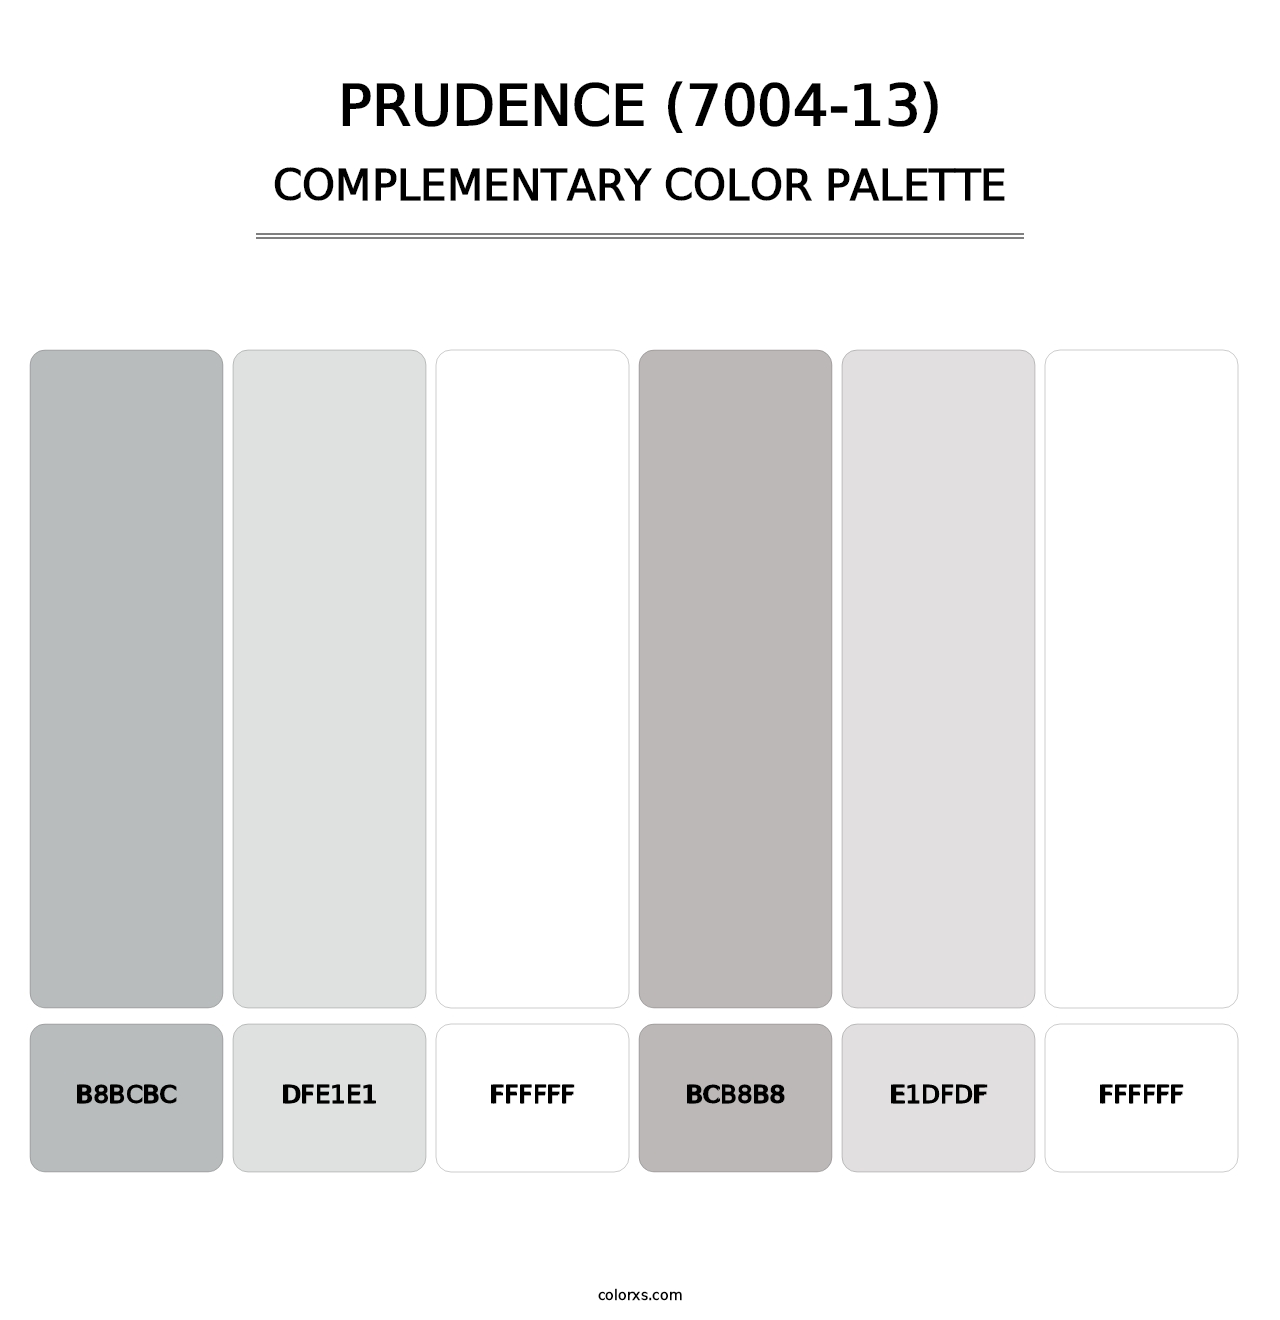 Prudence (7004-13) - Complementary Color Palette